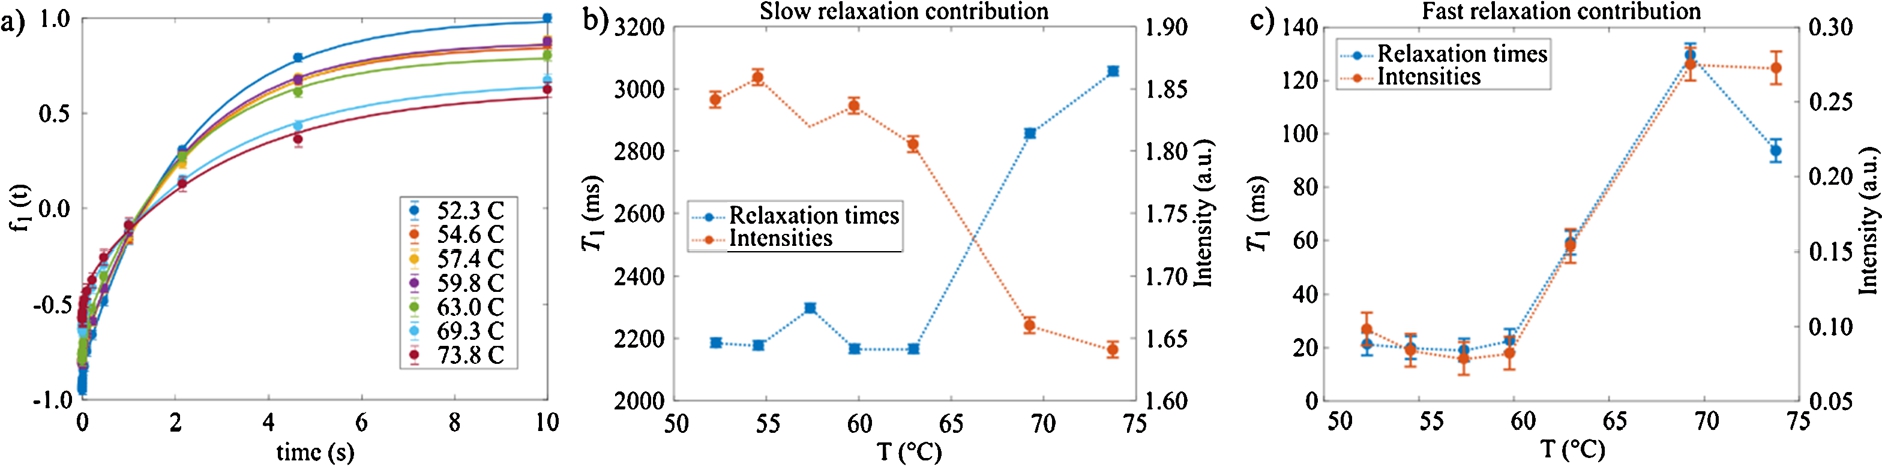 NMR T1 experiments: a) Inversion recovery curves for the different temperatures. b) and c) Temperature dependence of the relaxation times of the two components of T1, according to the data fitting with a bi-exponential model Eq. (5). The integrated intensities of these two relaxation time contributions are also shown.